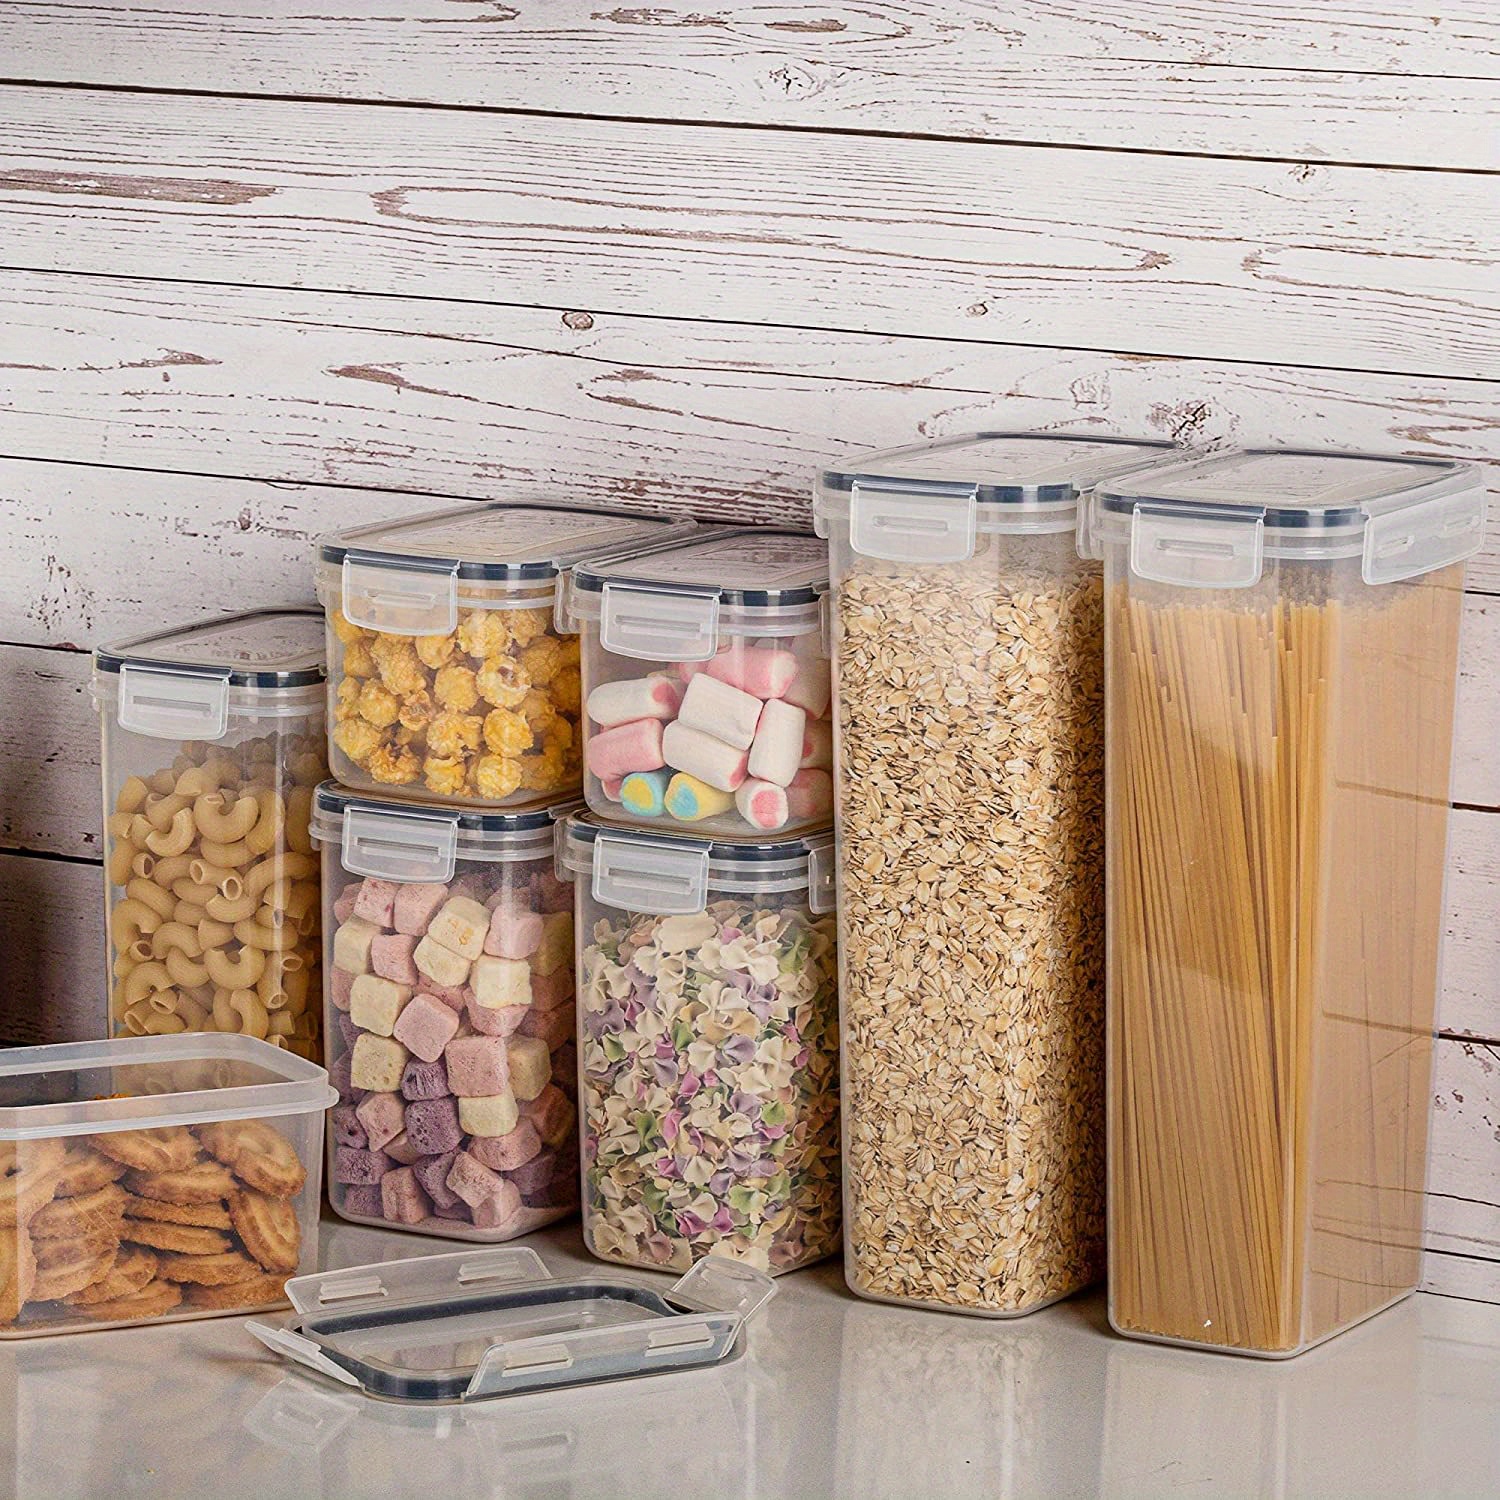 Visland Storage Containers with Lids,BPA Free Anti-Slip Plastic Air Tight Pantry Canisters for Kitchen,Spice Canisters,Cookie, Spice, Candy, Sugar